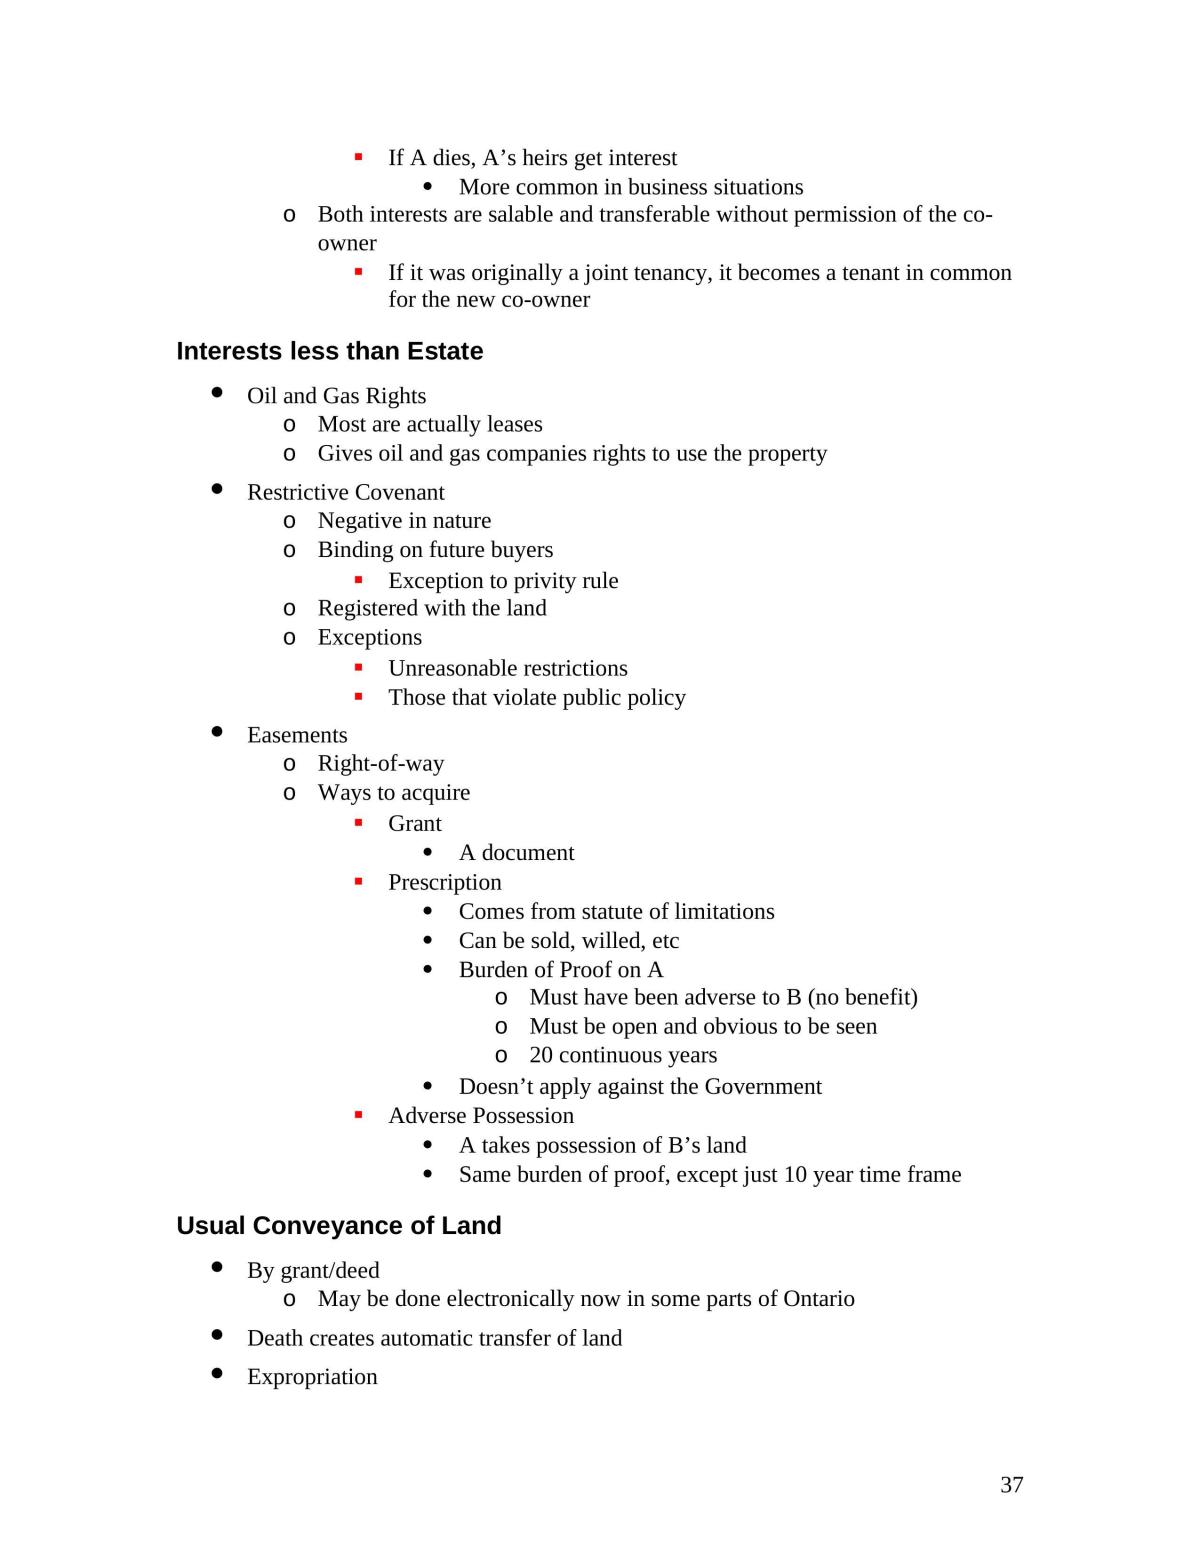 Complete Study Notes - COMM 4SD3 - Page 37